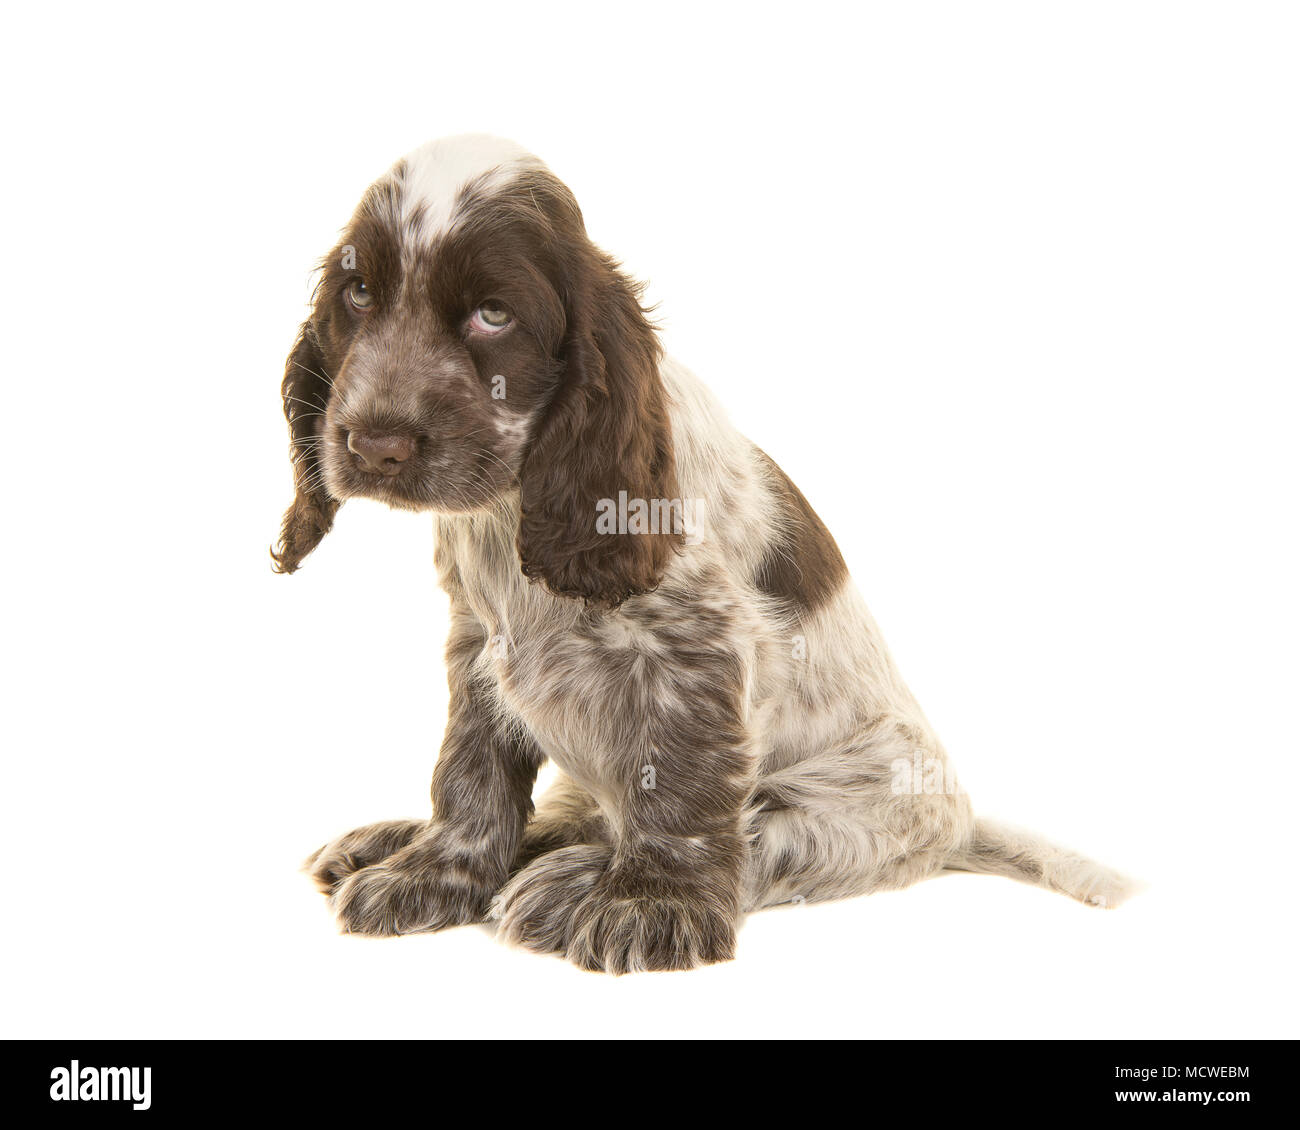 Sad looking cocker spaniel puppy dog sitting isolated on a white background Stock Photo